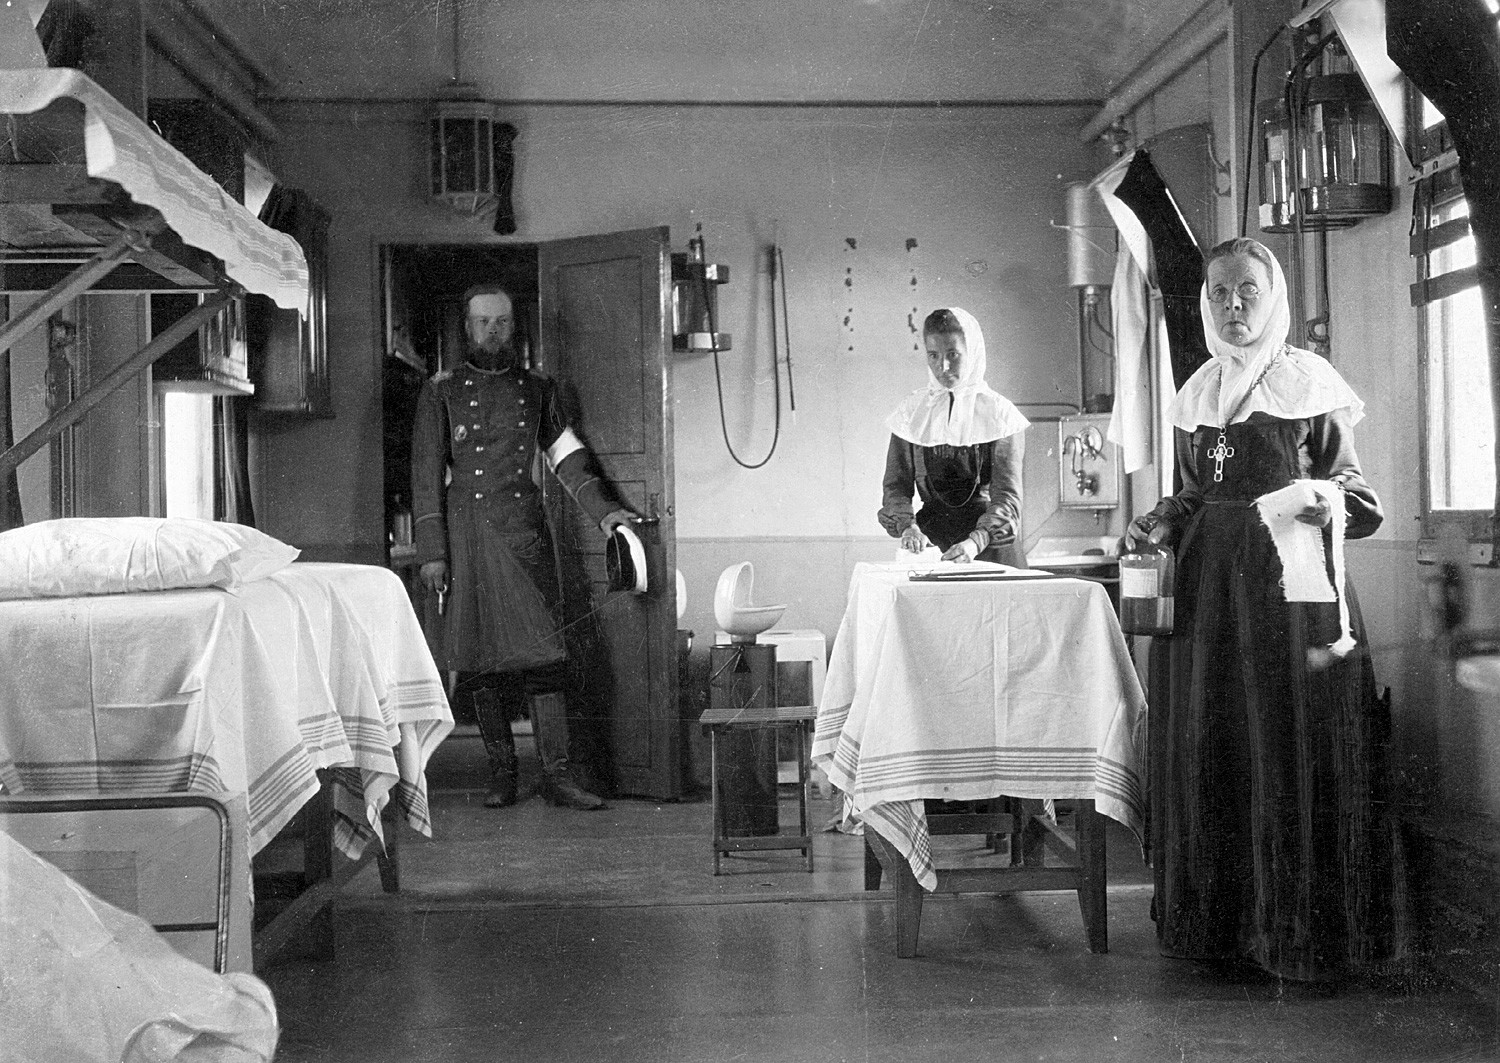  Paramedics and female paramedics in a hospital train of the Russian Red Cross.